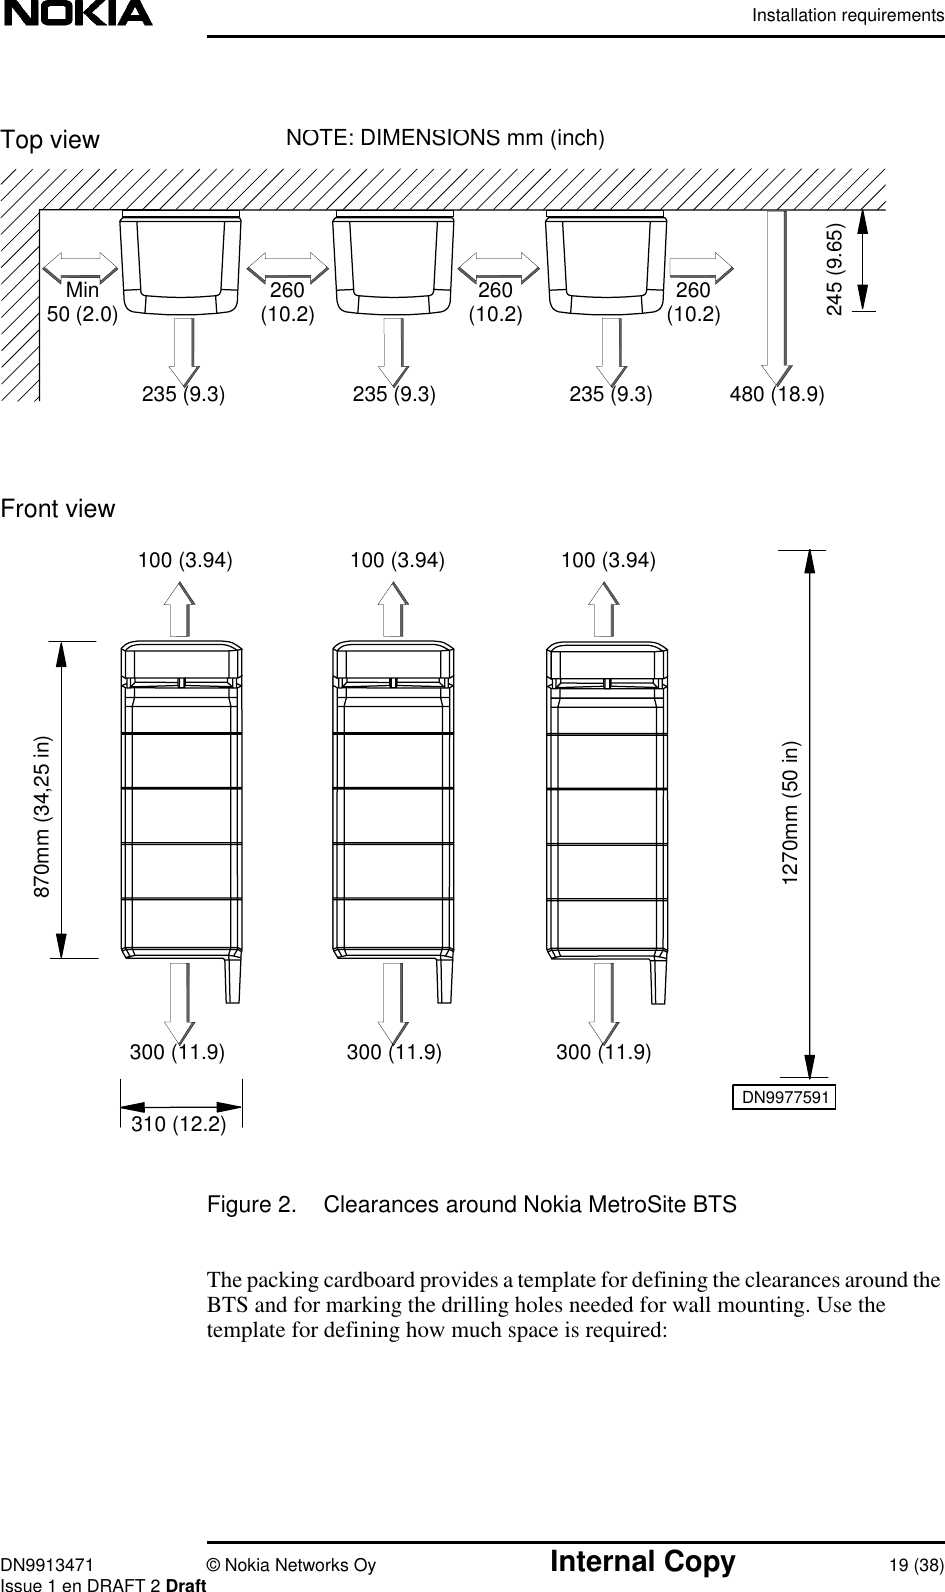 Installation requirementsDN9913471 © Nokia Networks Oy Internal Copy 19 (38)Issue 1 en DRAFT 2 DraftFigure 2. Clearances around Nokia MetroSite BTSThe packing cardboard provides a template for defining the clearances around theBTS and for marking the drilling holes needed for wall mounting. Use thetemplate for defining how much space is required:Top viewFront viewMin50(2.0)260(10.2)245 (9.65)310 (12.2)100 (3.94)480(18.9)300 (11.9)260(10.2)260(10.2)235(9.3)100 (3.94) 100 (3.94)235(9.3)235(9.3)300 (11.9) 300 (11.9)NOTE: DIMENSIONS mm (inch)870mm (34,25 in)1270mm (50 in)DN9977591